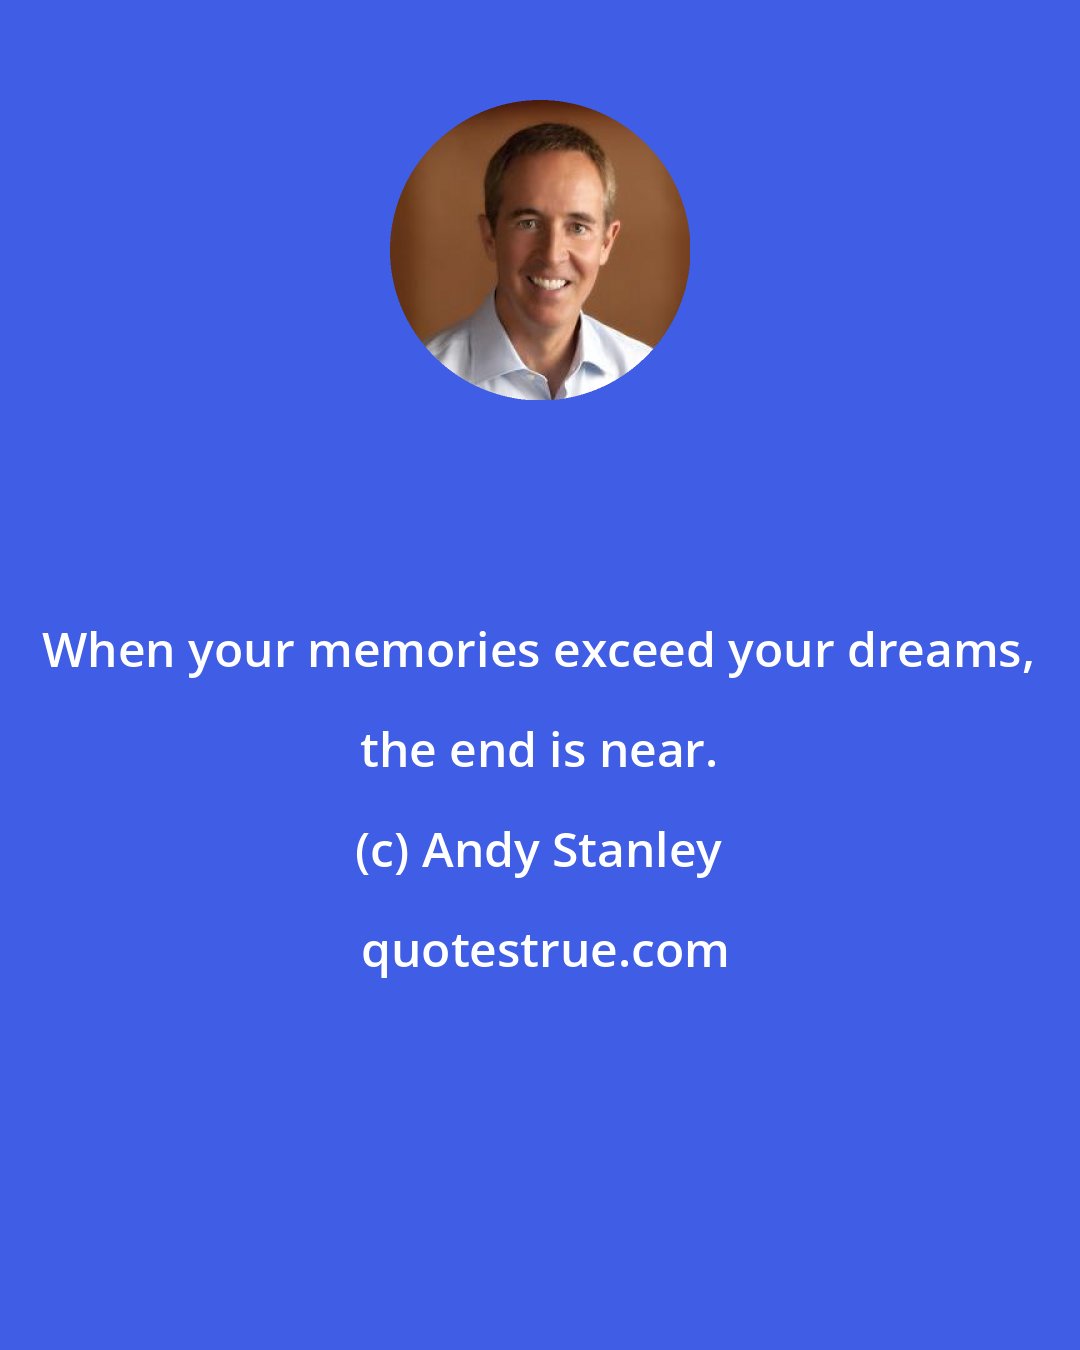 Andy Stanley: When your memories exceed your dreams, the end is near.